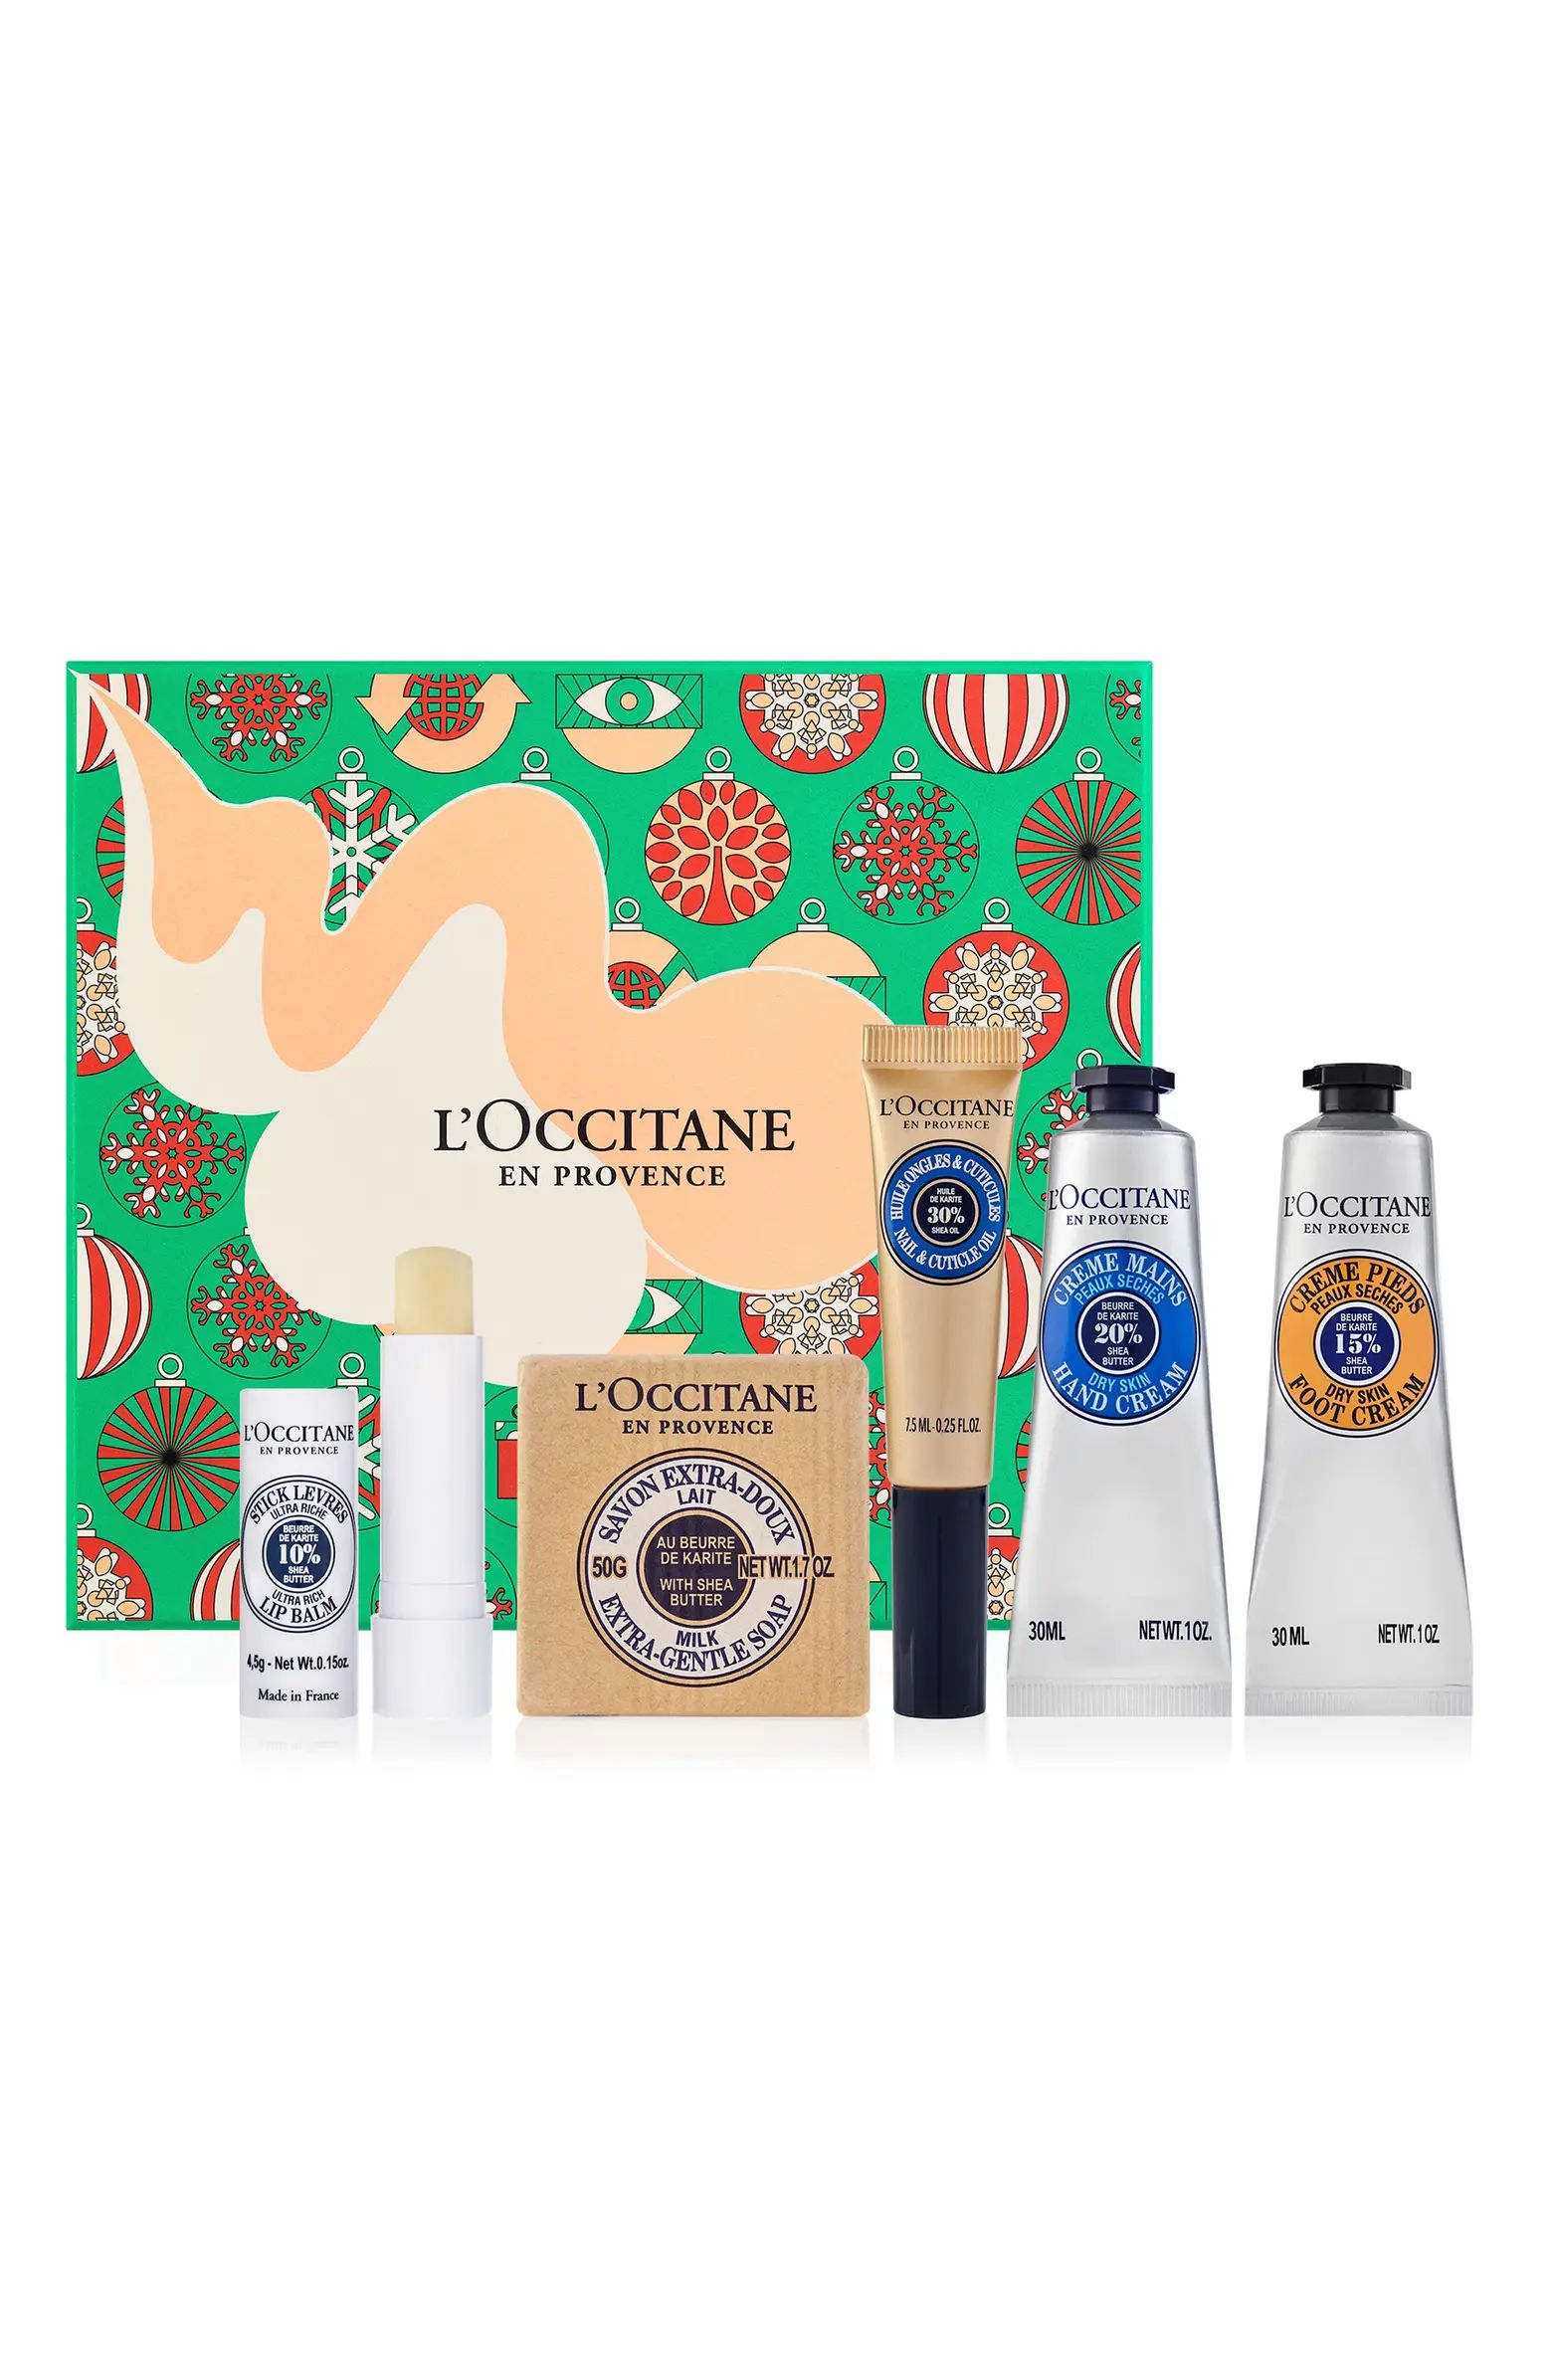 Shea 5-Piece Holiday Gift Set $63 Value | Nordstrom